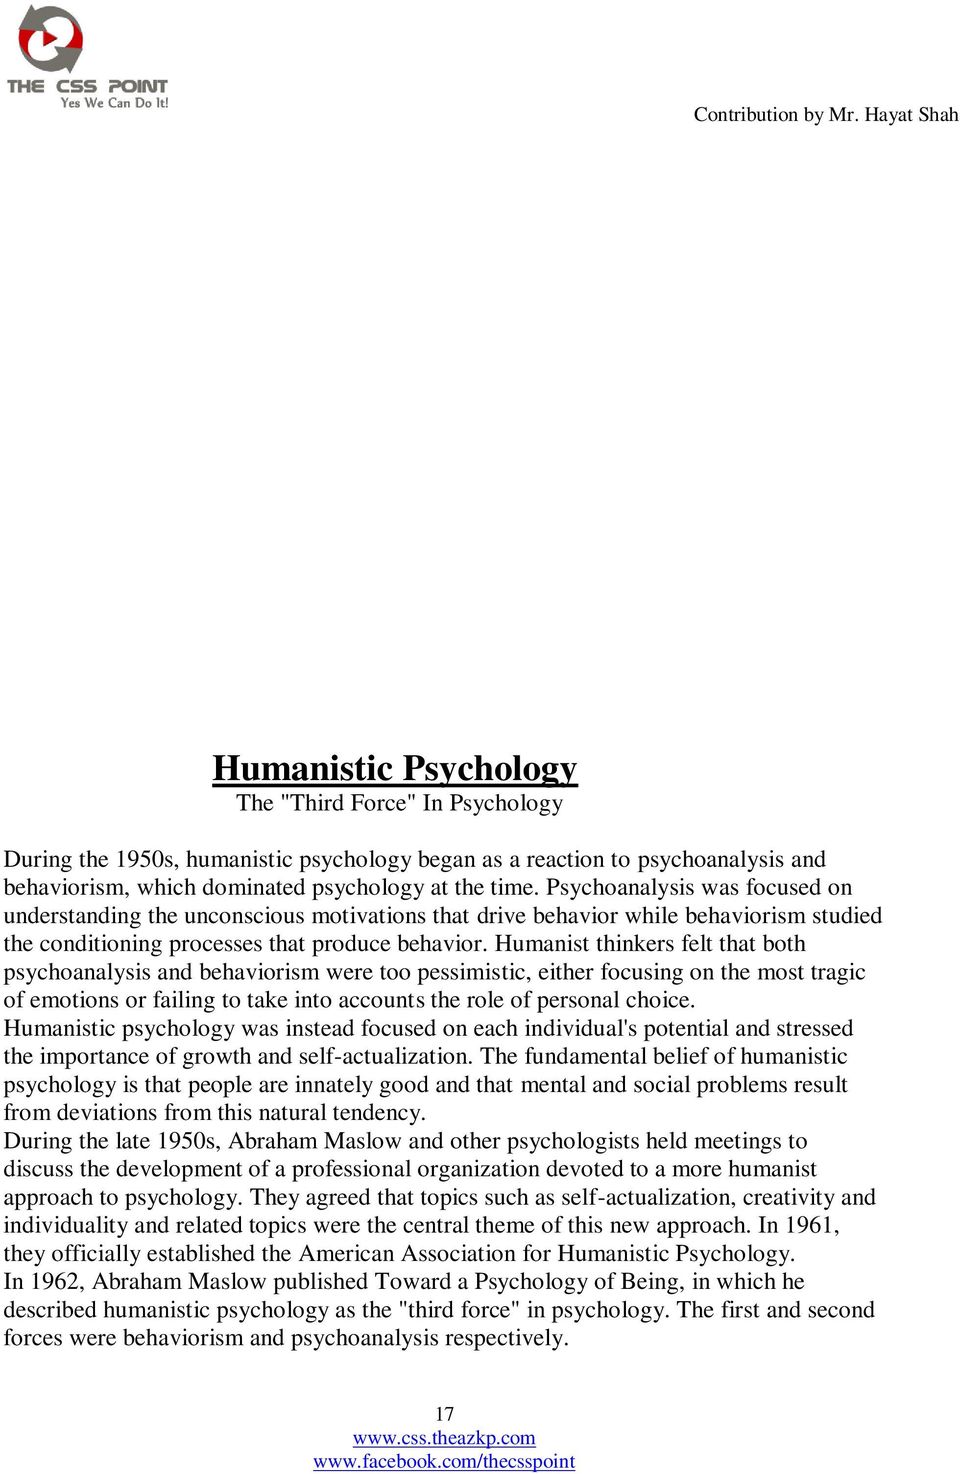 Humanist thinkers felt that both psychoanalysis and behaviorism were too pessimistic, either focusing on the most tragic of emotions or failing to take into accounts the role of personal choice.